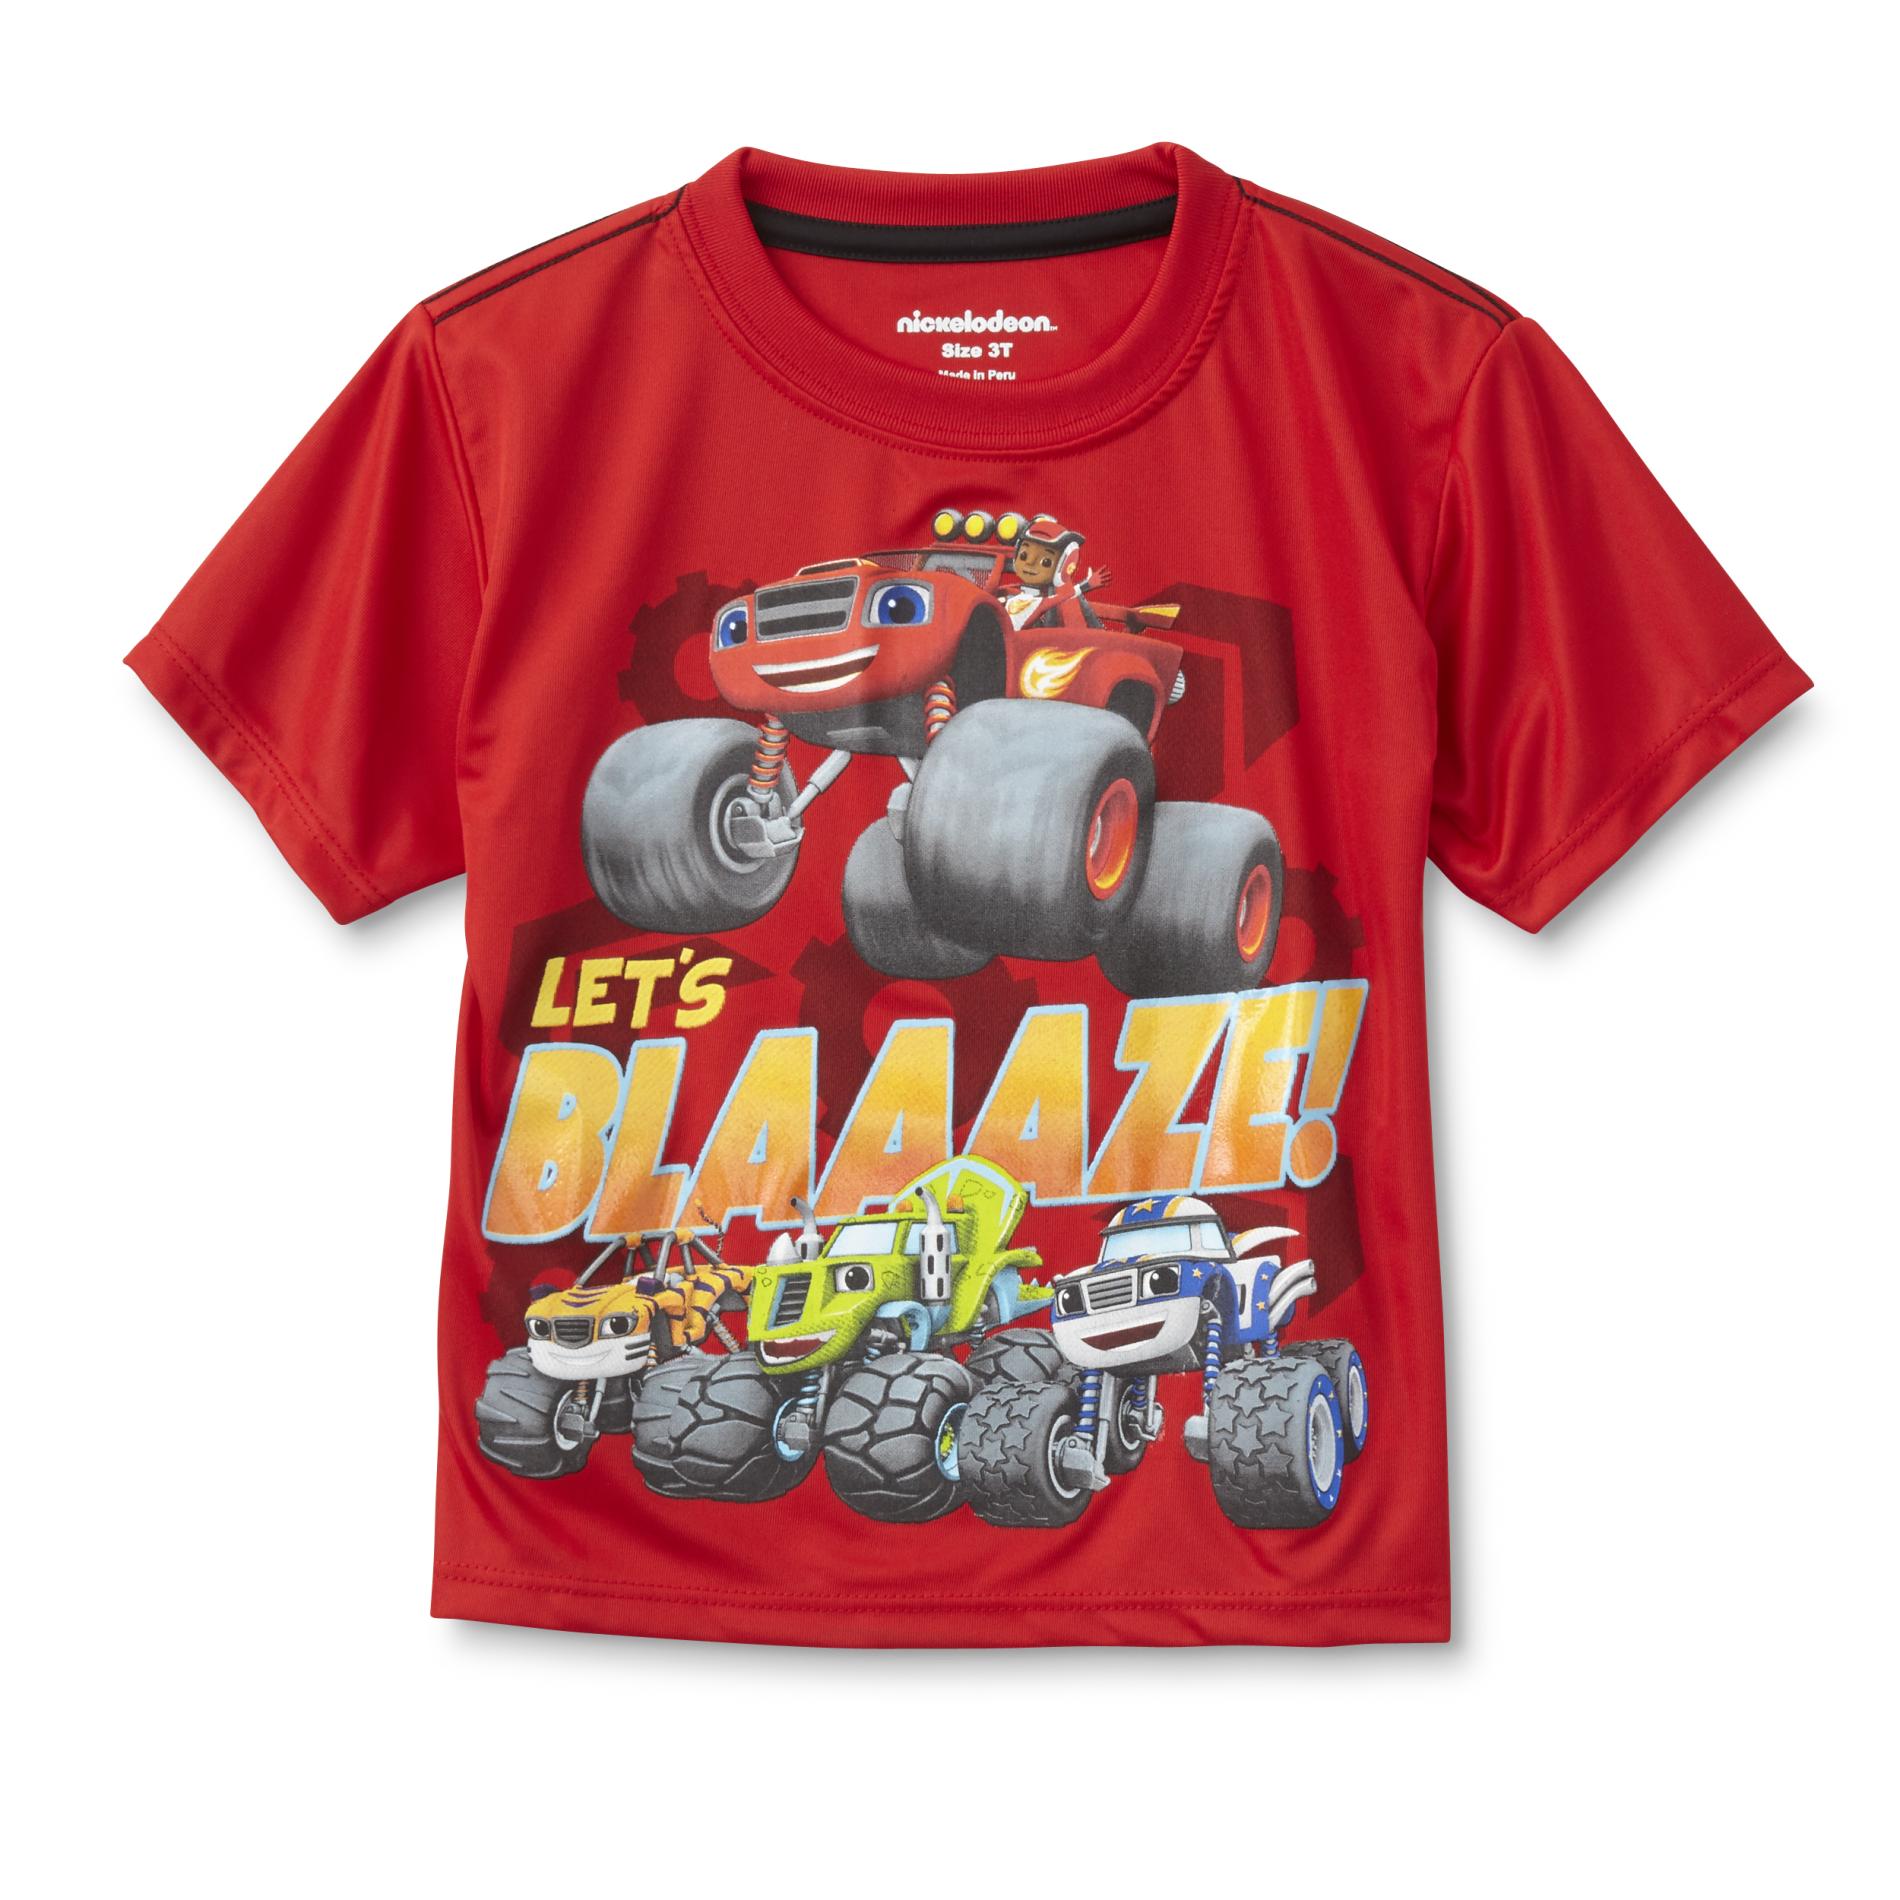 Nickelodeon Blaze & the Monster Machines Toddler Boys' Athletic T-Shirt